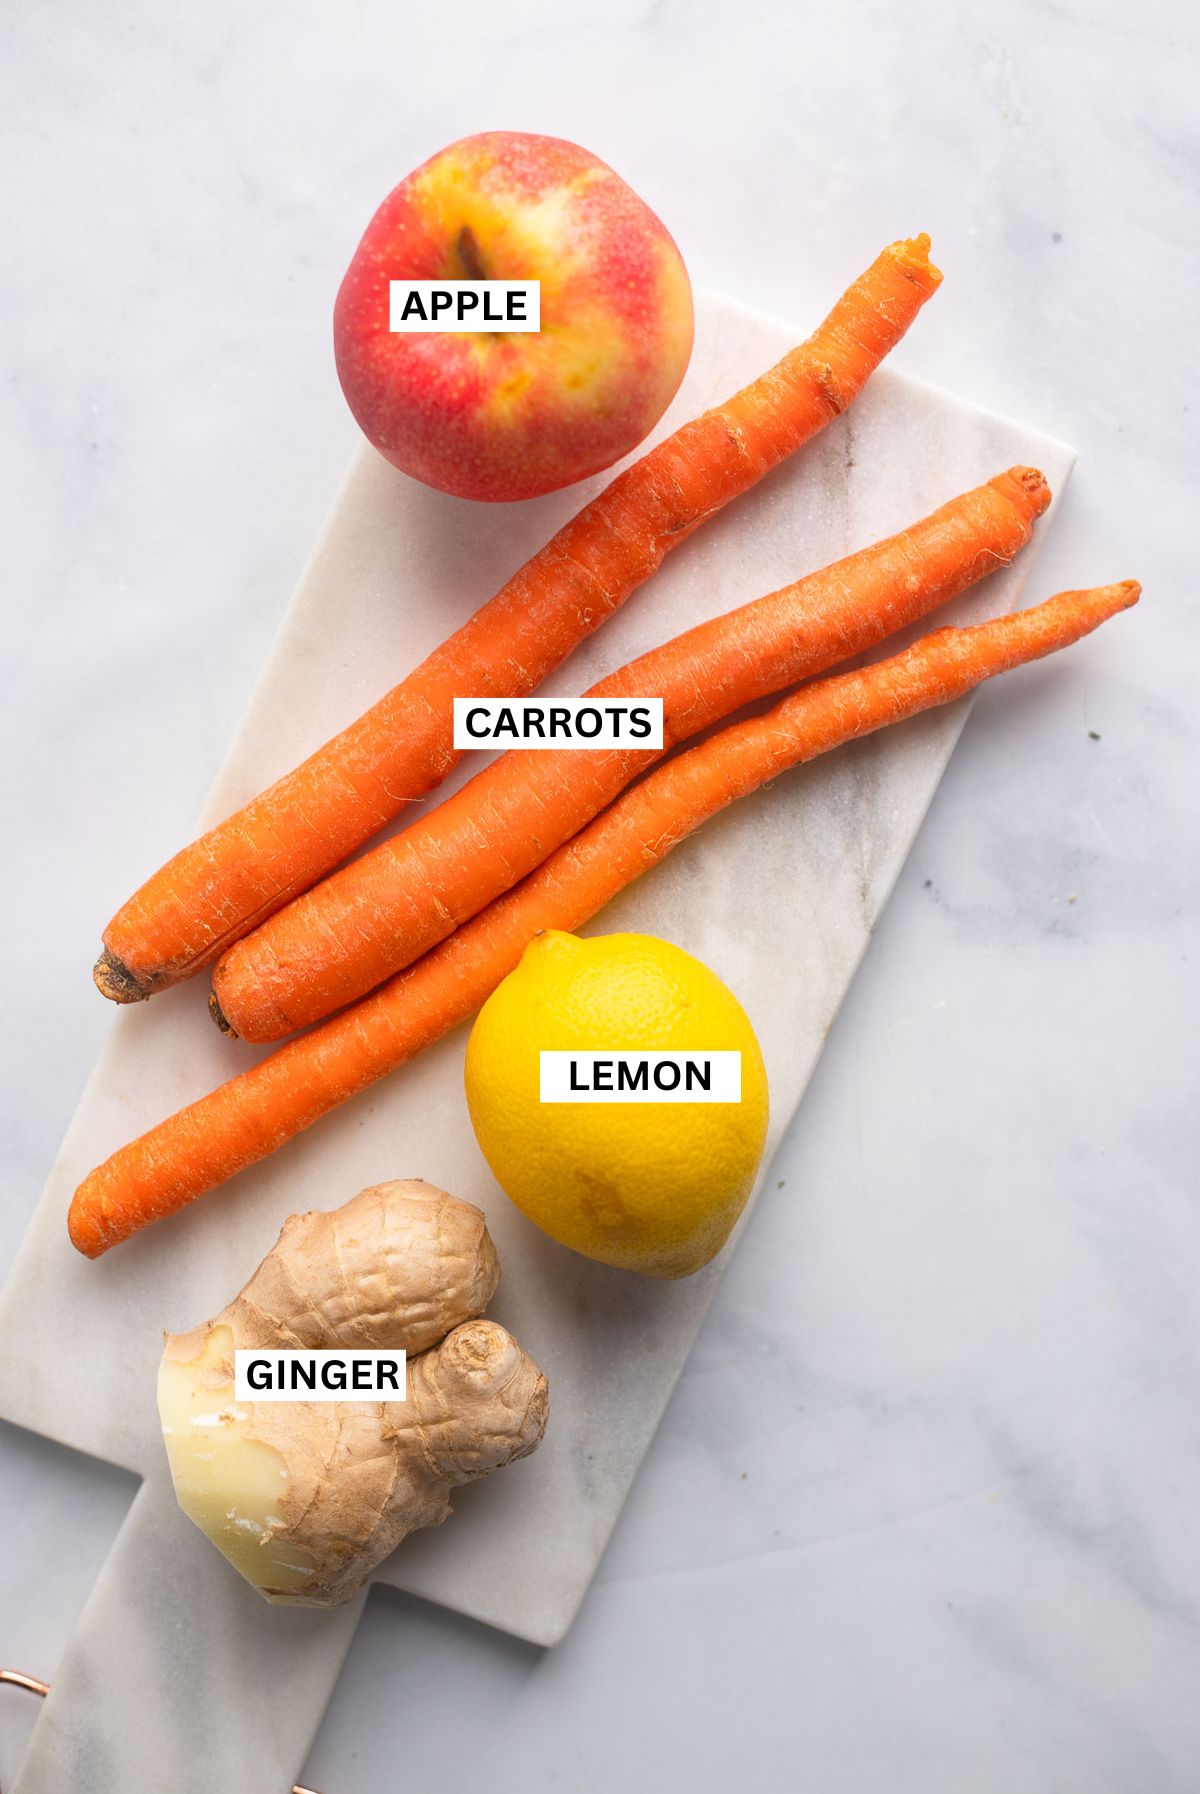 carrot and ginger juice ingredients laid out on white background with labels.